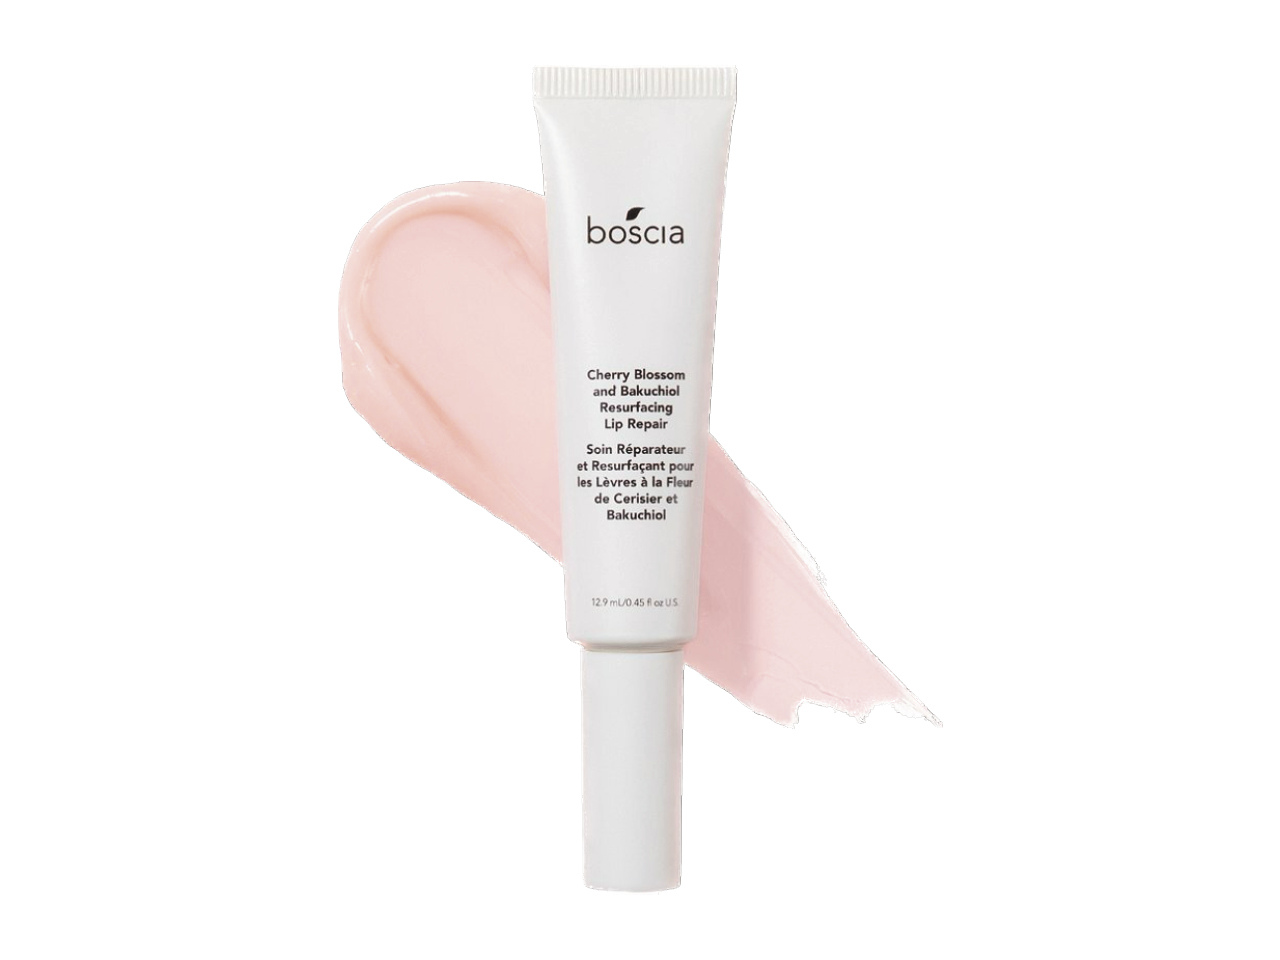 A white tube of Boscia Cherry Blossom and Bakuchiol Resurfacing Lip Repair lip balm with a pink product swatch.